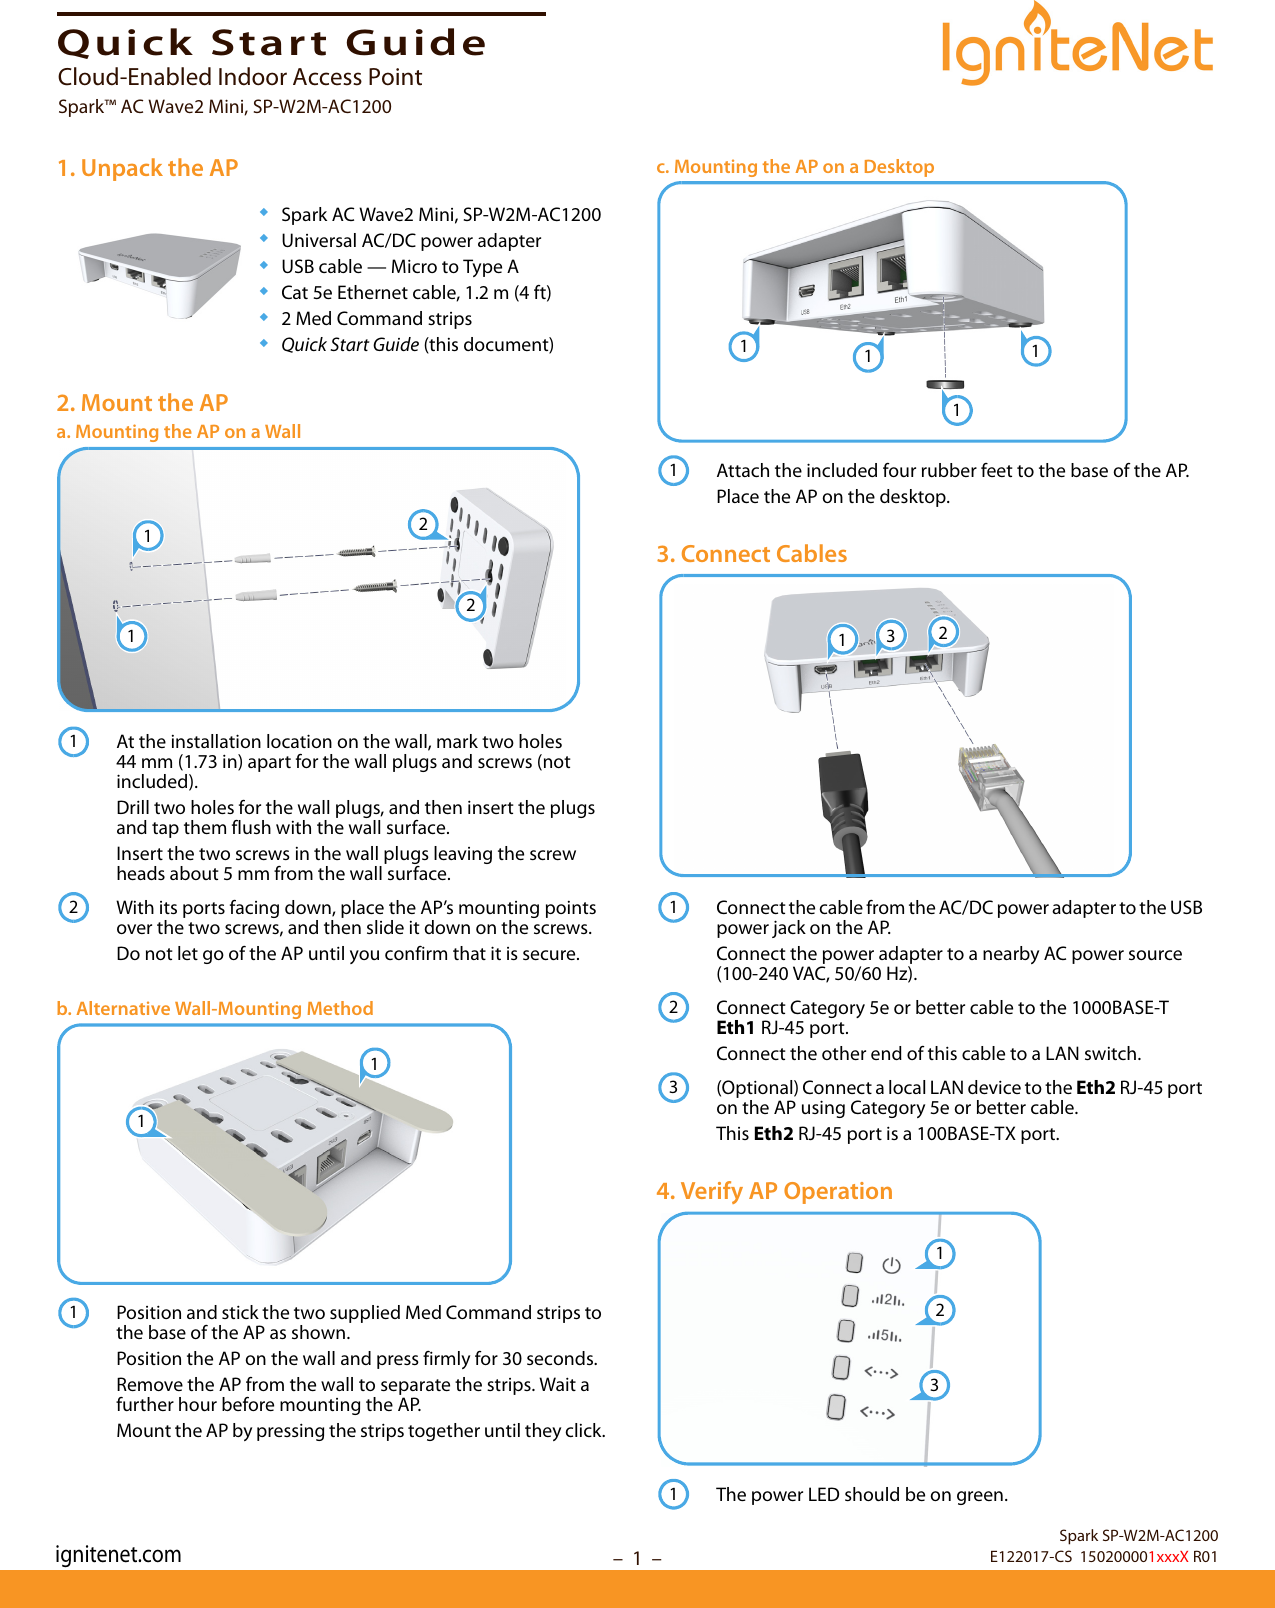 –  1  –Quick Start Guide1. Unpack the AP◆Spark AC Wave2 Mini, SP-W2M-AC1200◆Universal AC/DC power adapter◆USB cable — Micro to Type A◆Cat 5e Ethernet cable, 1.2 m (4 ft)◆2 Med Command strips◆Quick Start Guide (this document)2. Mount the APa. Mounting the AP on a WallAt the installation location on the wall, mark two holes 44 mm (1.73 in) apart for the wall plugs and screws (not included).Drill two holes for the wall plugs, and then insert the plugs and tap them flush with the wall surface. Insert the two screws in the wall plugs leaving the screw heads about 5 mm from the wall surface.With its ports facing down, place the AP’s mounting points over the two screws, and then slide it down on the screws.Do not let go of the AP until you confirm that it is secure.b. Alternative Wall-Mounting MethodPosition and stick the two supplied Med Command strips to the base of the AP as shown.Position the AP on the wall and press firmly for 30 seconds.Remove the AP from the wall to separate the strips. Wait a further hour before mounting the AP.Mount the AP by pressing the strips together until they click.122112111c. Mounting the AP on a DesktopAttach the included four rubber feet to the base of the AP.Place the AP on the desktop.3. Connect CablesConnect the cable from the AC/DC power adapter to the USB power jack on the AP.Connect the power adapter to a nearby AC power source (100-240 VAC, 50/60 Hz).Connect Category 5e or better cable to the 1000BASE-T Eth1 RJ-45 port.Connect the other end of this cable to a LAN switch.(Optional) Connect a local LAN device to the Eth2 RJ-45 port on the AP using Category 5e or better cable.This Eth2 RJ-45 port is a 100BASE-TX port.4. Verify AP OperationThe power LED should be on green.111113121231231Spark SP-W2M-AC1200E122017-CS  150200001xxxX R01Cloud-Enabled Indoor Access PointSpark™ AC Wave2 Mini, SP-W2M-AC1200ignitenet.com